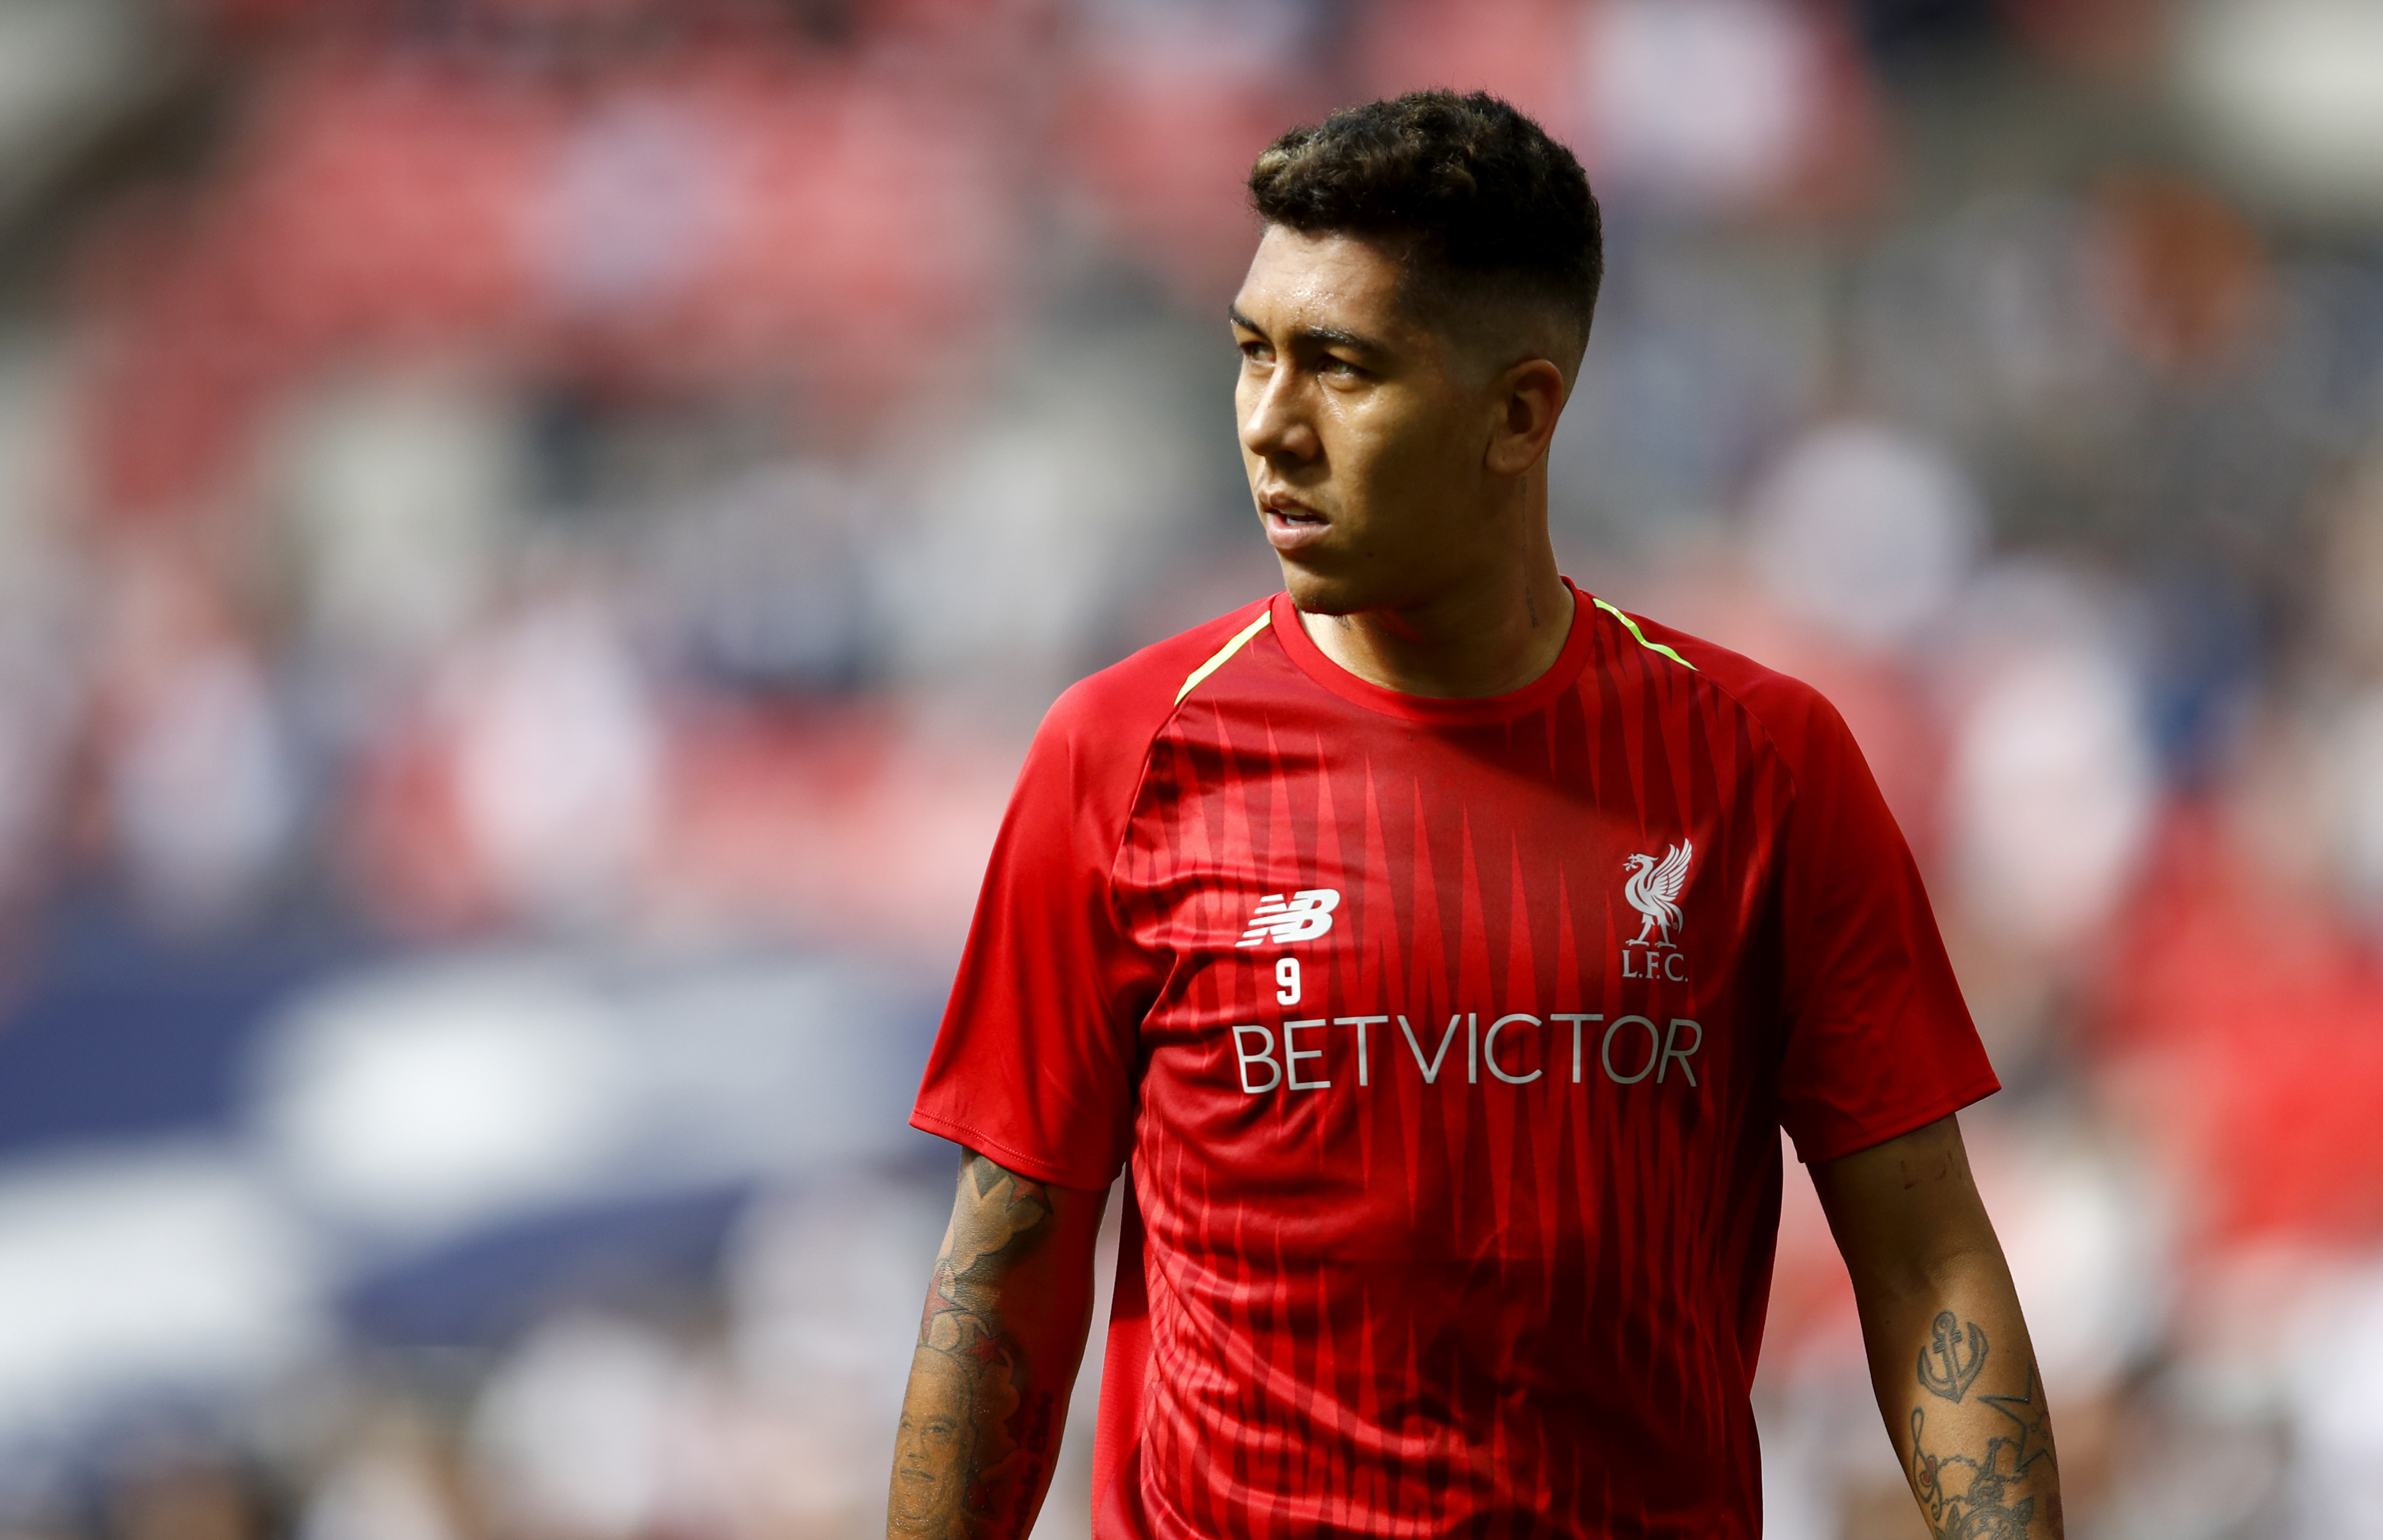 LONDON, ENGLAND - SEPTEMBER 15:  Roberto Firmino of Liverpool warms up ahead of the Premier League match between Tottenham Hotspur and Liverpool FC at Wembley Stadium on September 15, 2018 in London, United Kingdom.  (Photo by Julian Finney/Getty Images)